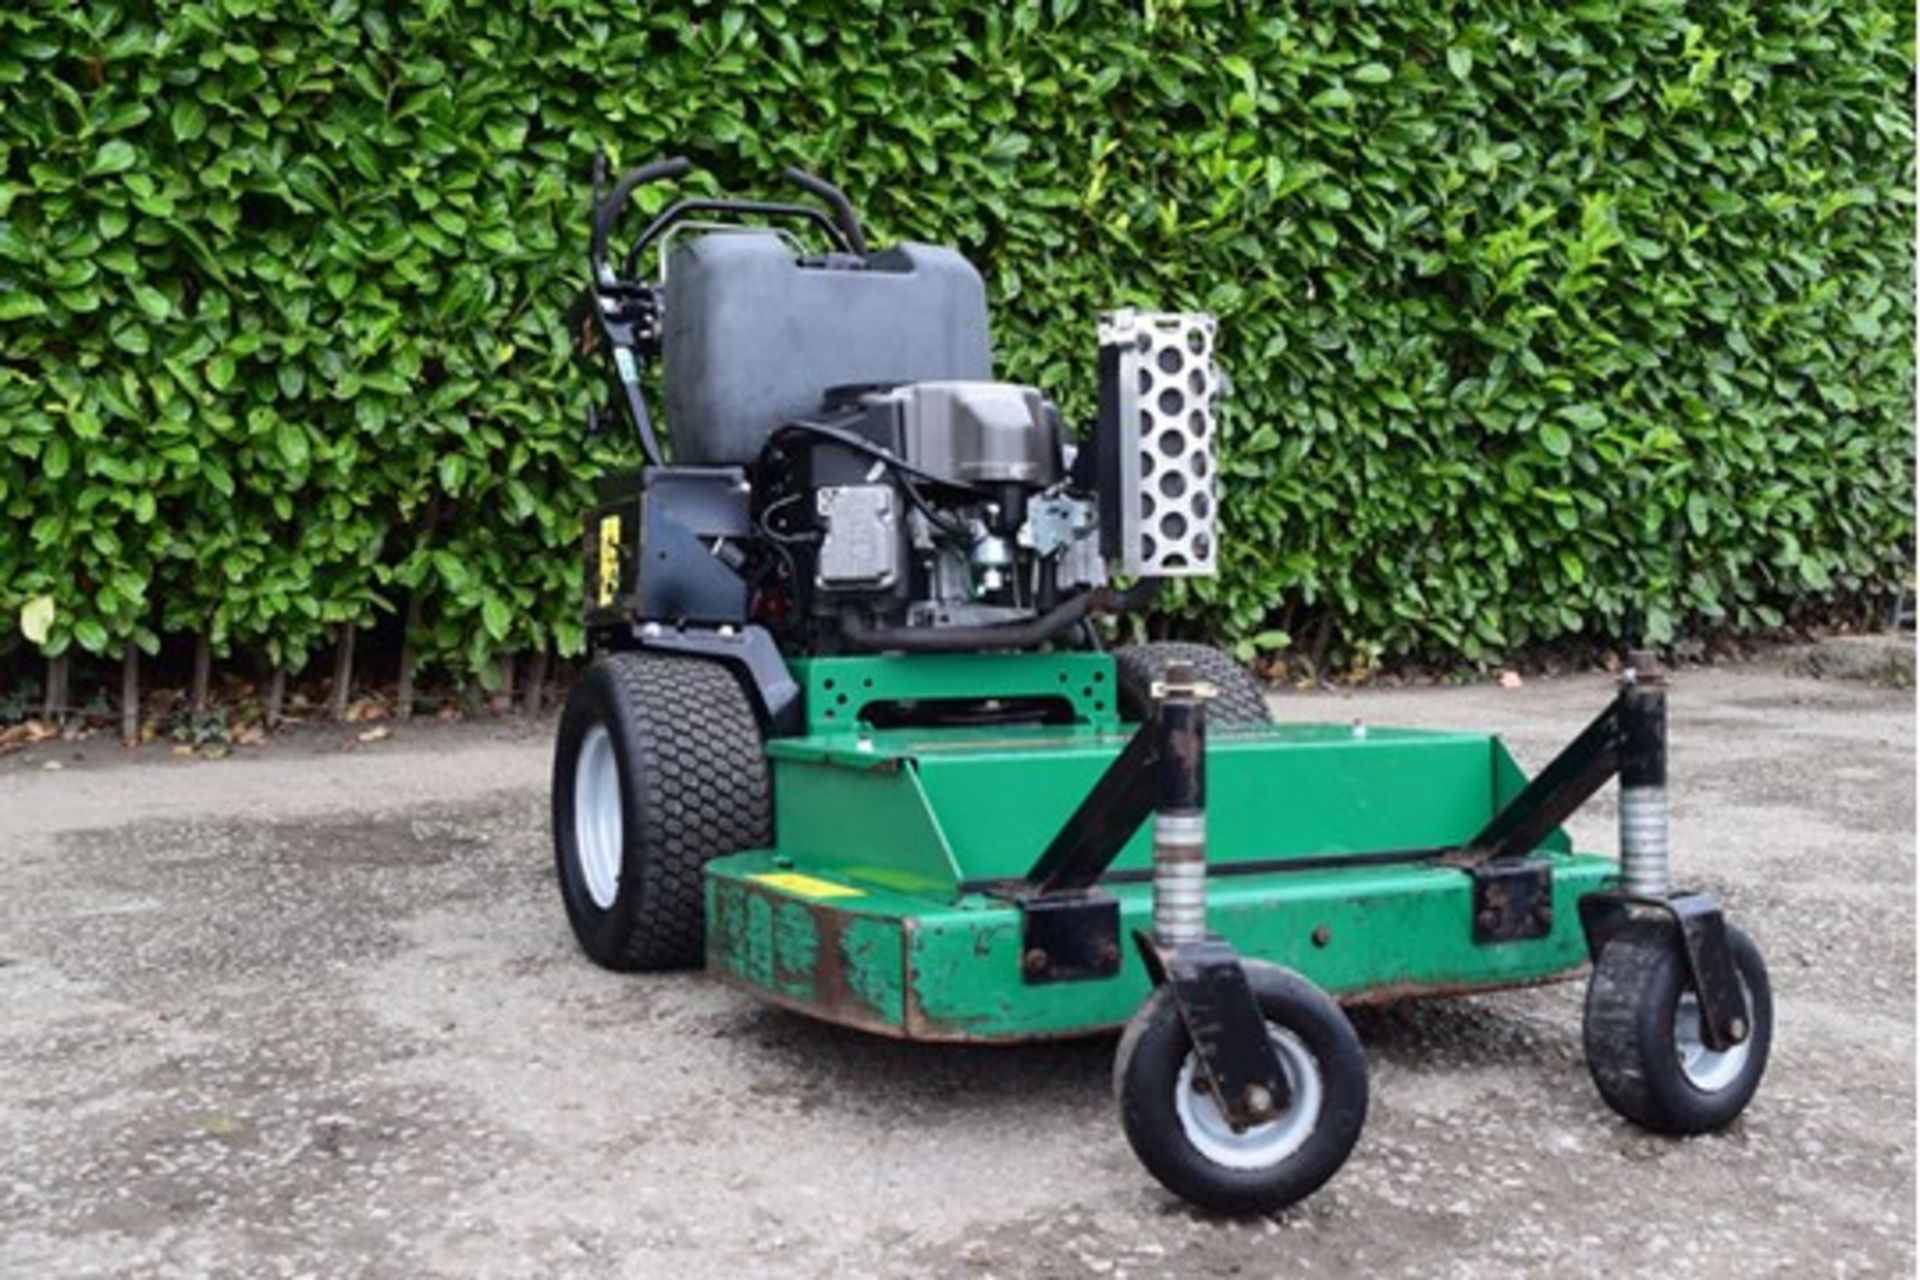 2011 Ransomes Pedestrian 36" Commercial Mower - Image 6 of 8